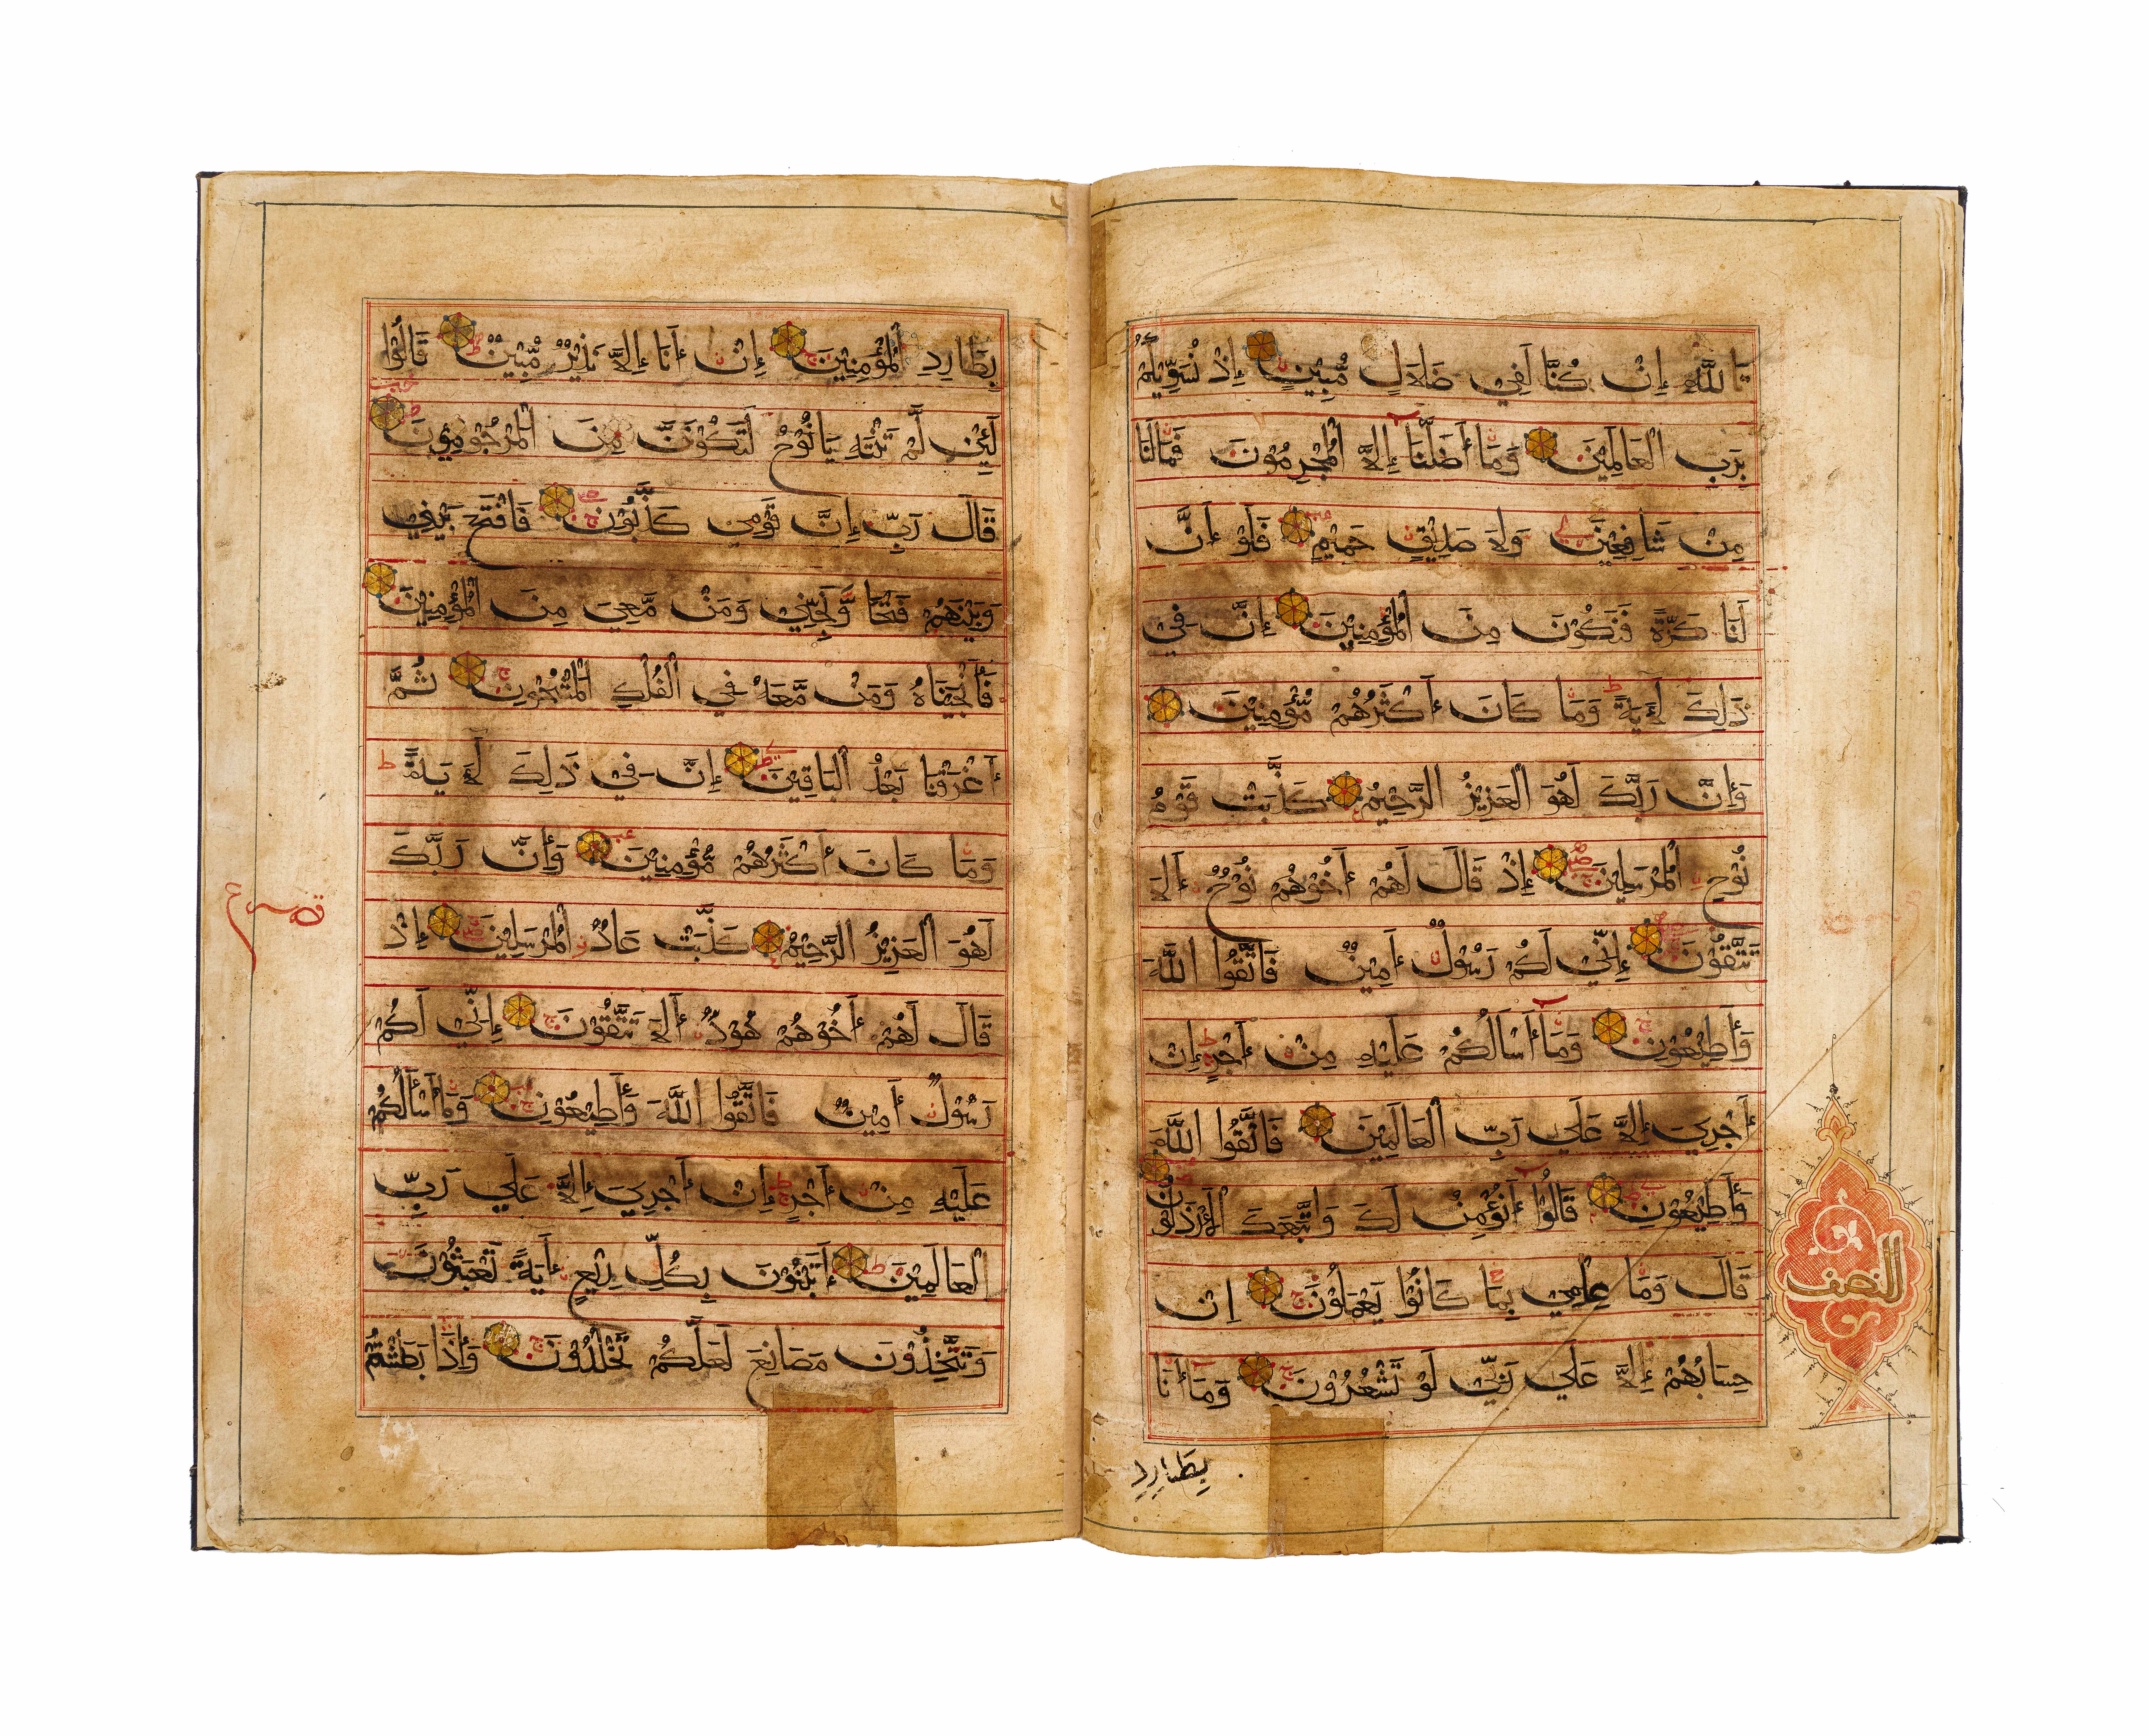 AN ILLUMINATED SECTION FROM A MONUMENTAL BIHARI QUR'AN SULTANATE INDIA, 15TH CENTURY - Image 5 of 7